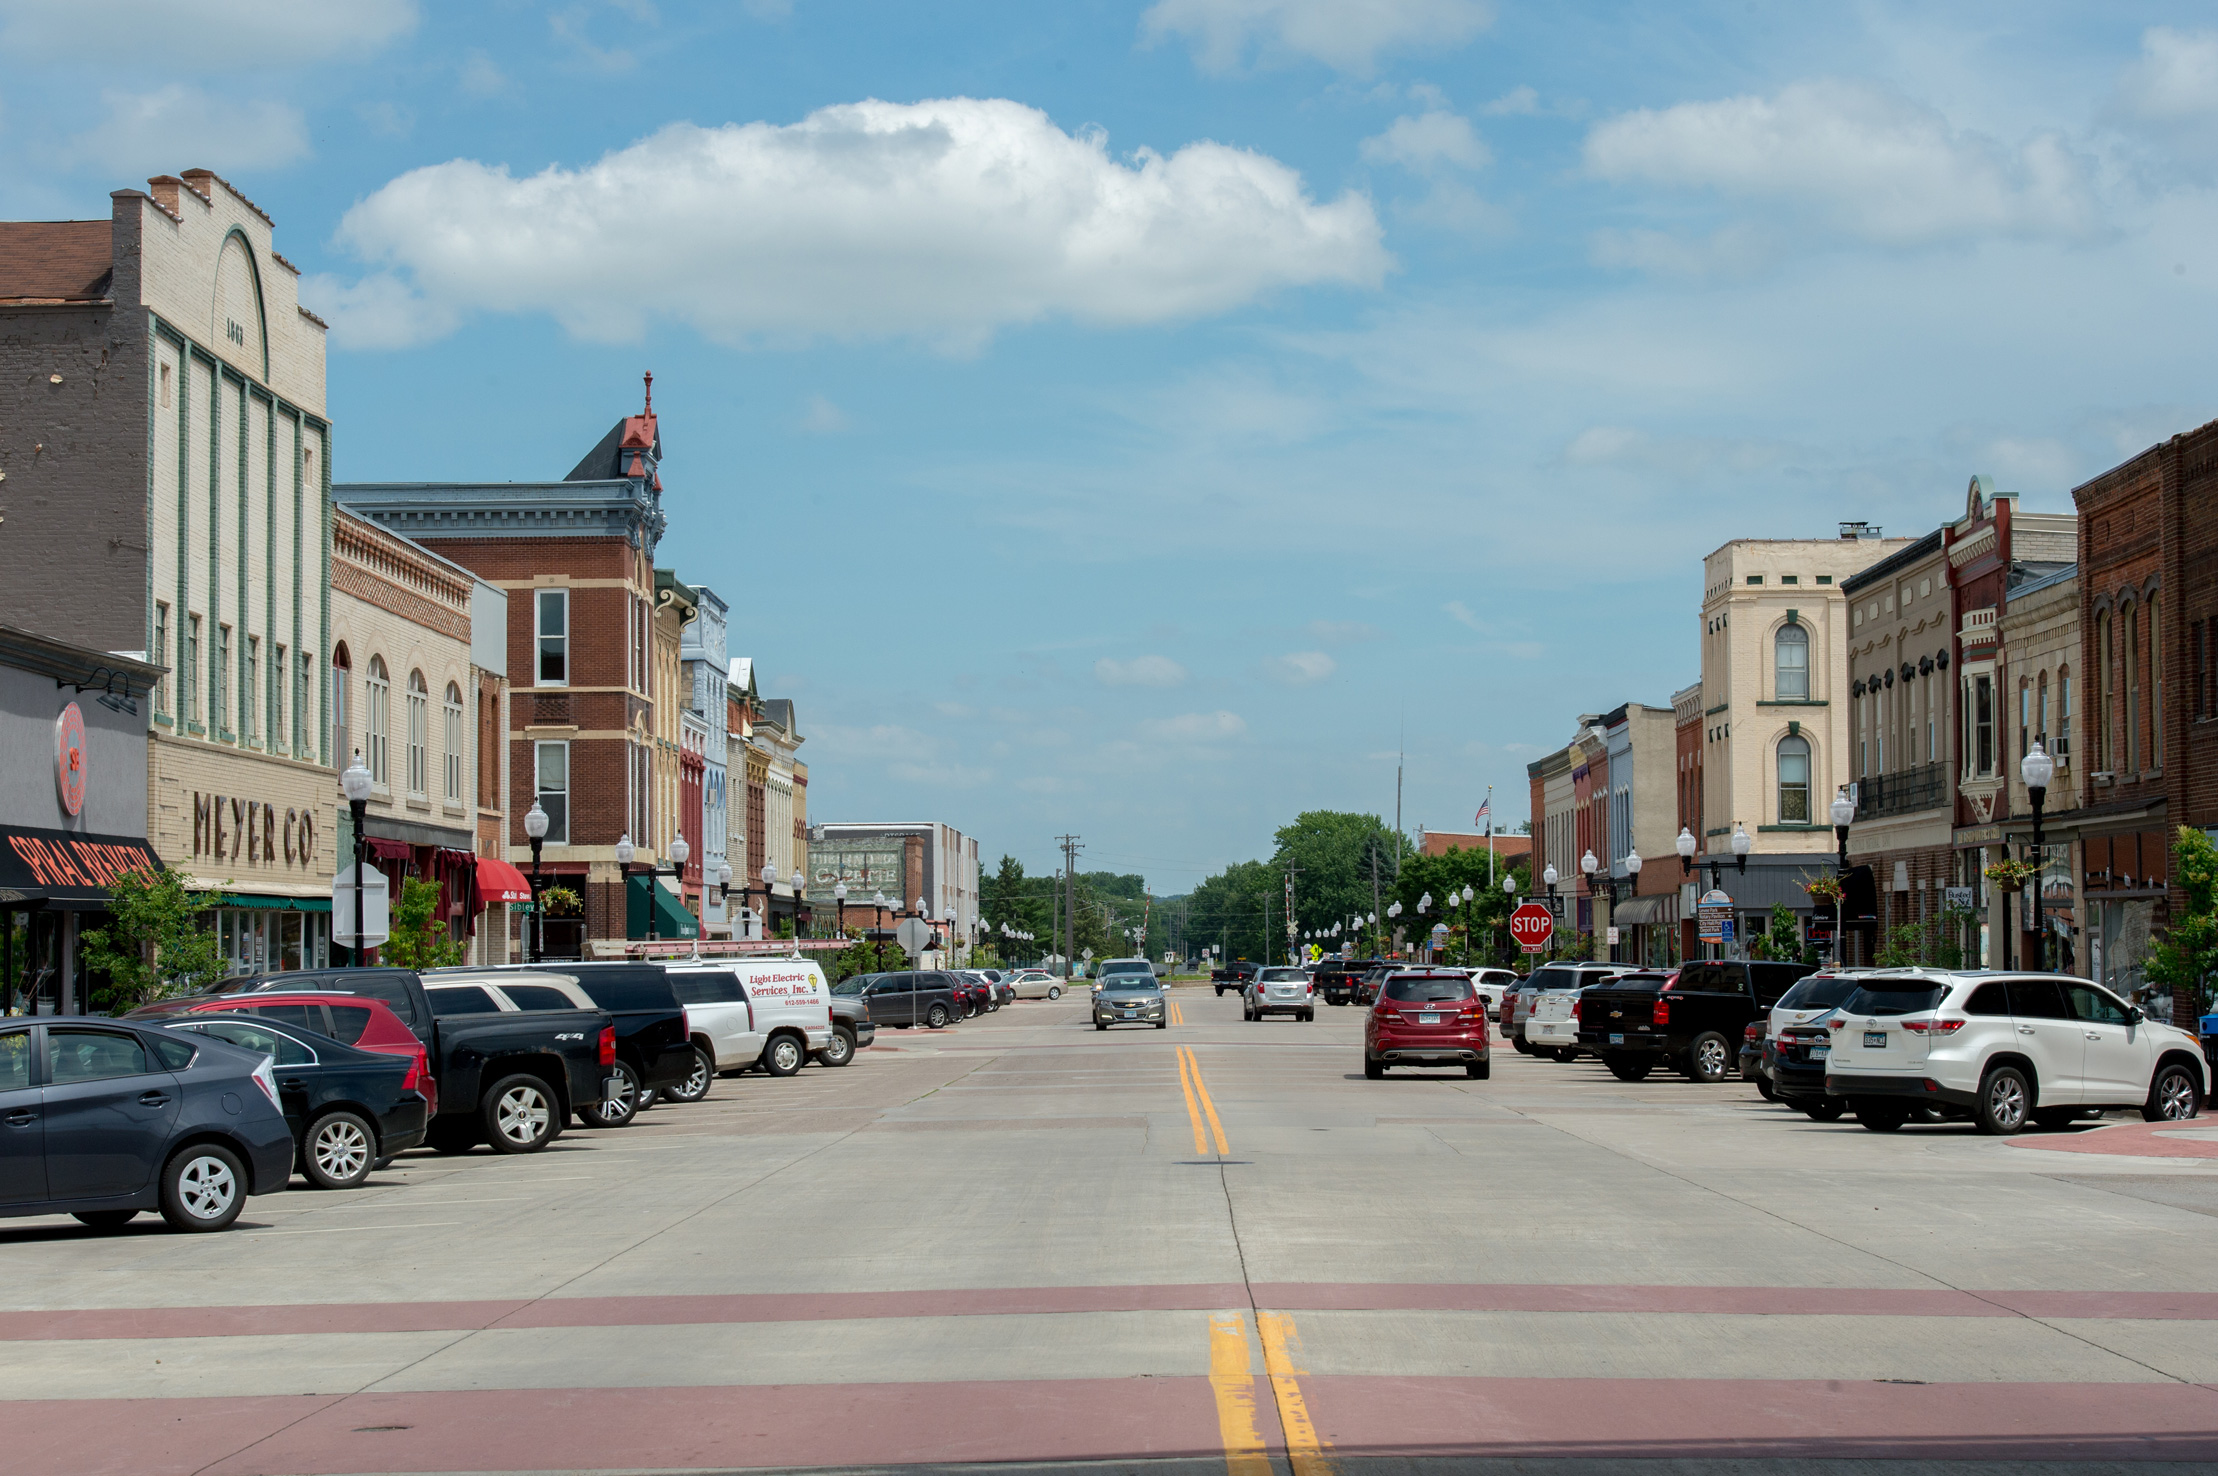 Main Street in a small town with storefronts and cars parked on both sides.